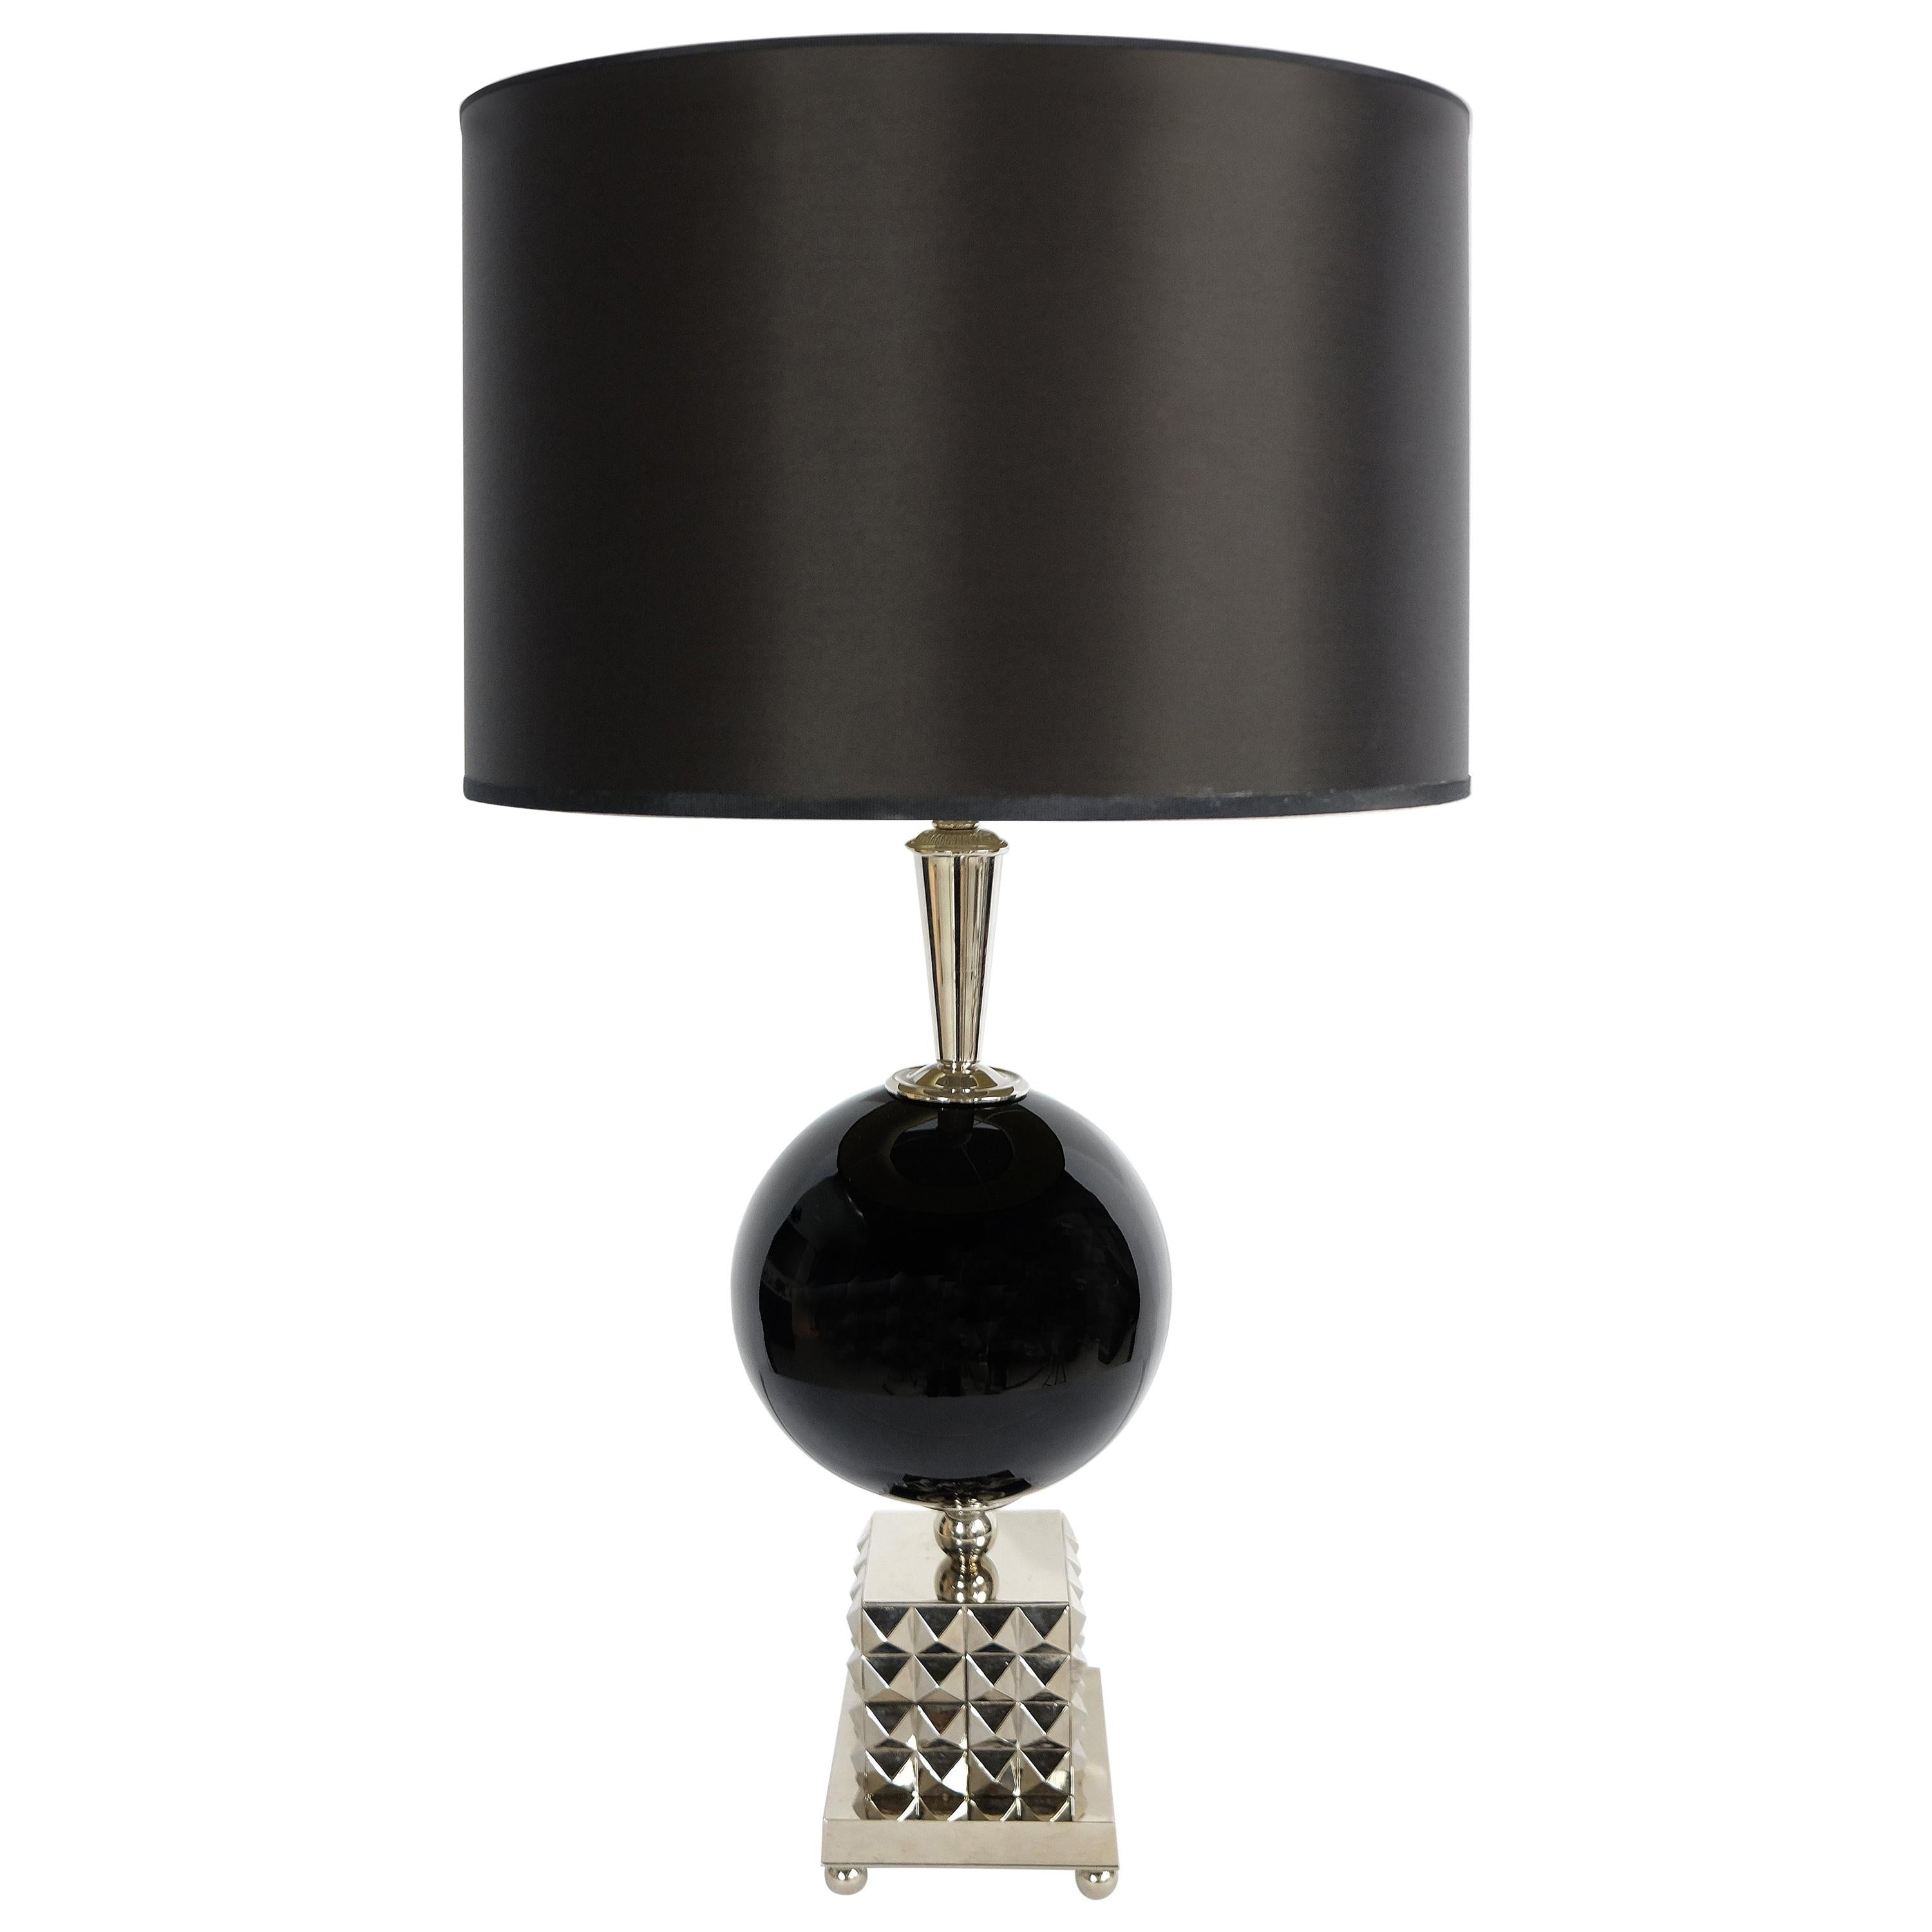 Laudarte Srl Lume Yago Table Lamp in Nickel and Glass For Sale